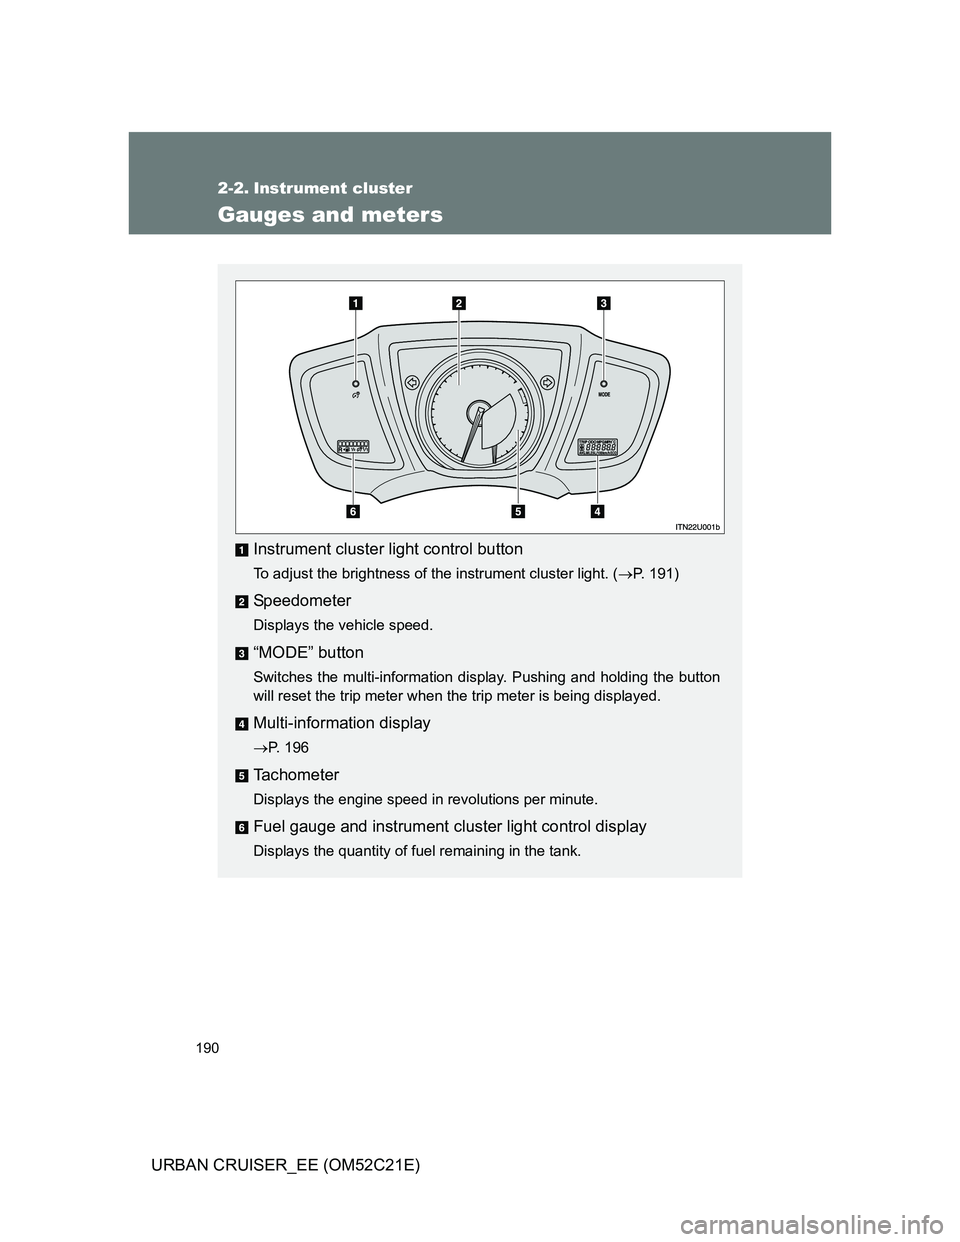 TOYOTA URBAN CRUISER 2011  Owners Manual 190
URBAN CRUISER_EE (OM52C21E)
2-2. Instrument cluster
Gauges and meters
Instrument cluster light control button
To adjust the brightness of the instrument cluster light. (P. 191)
Speedometer
Disp